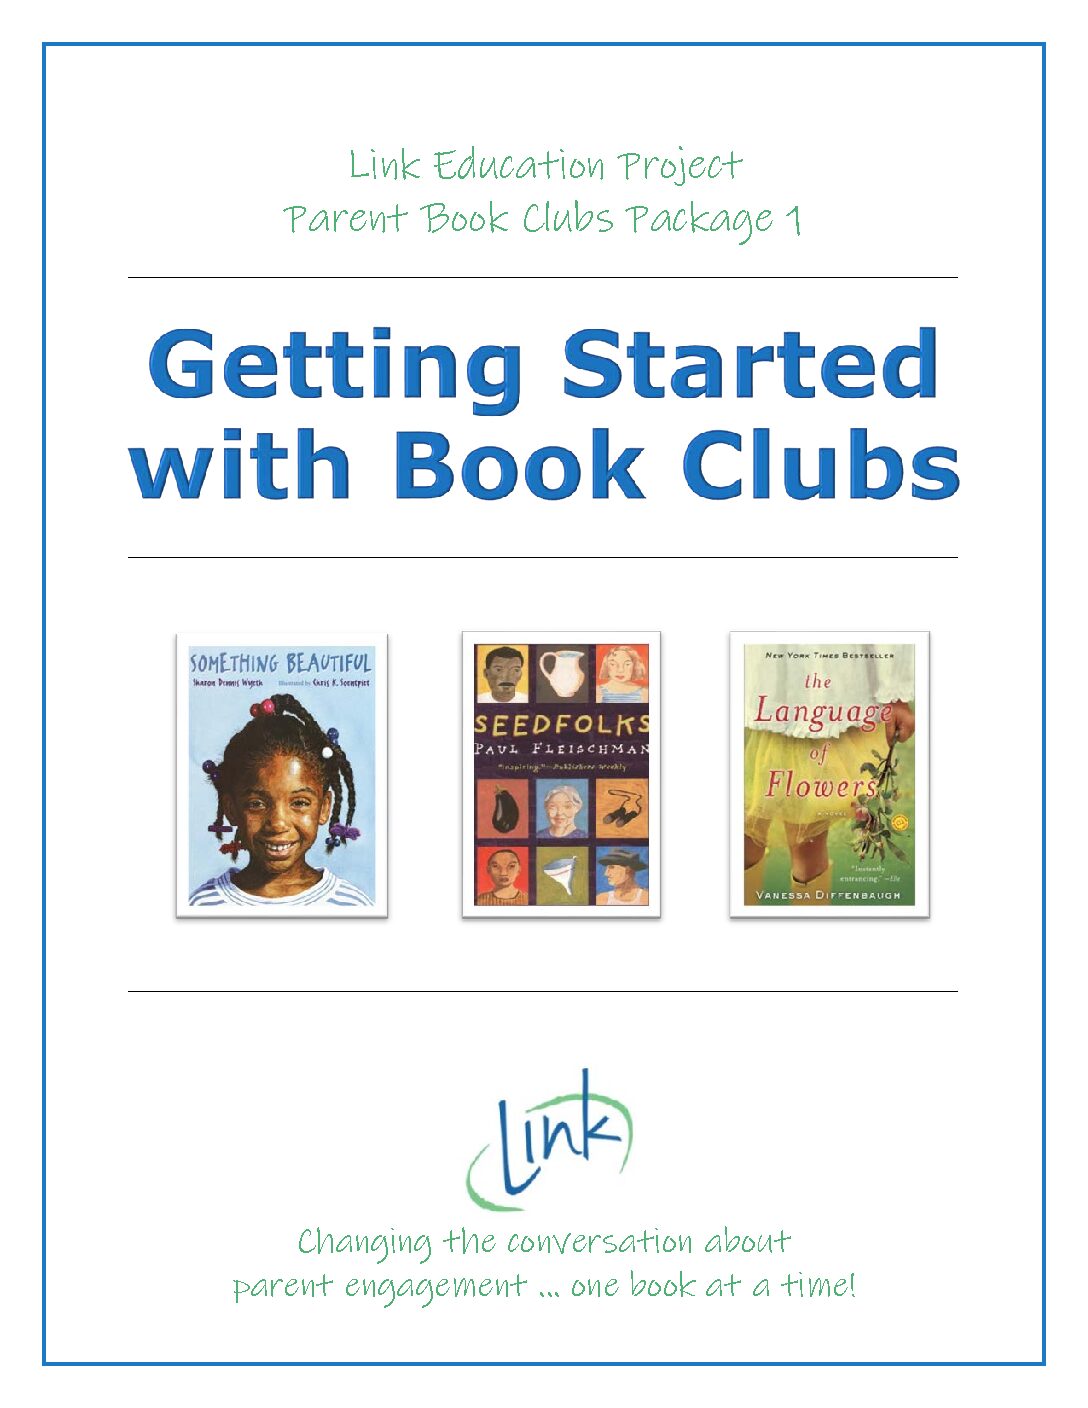 Getting Started with Book Clubs